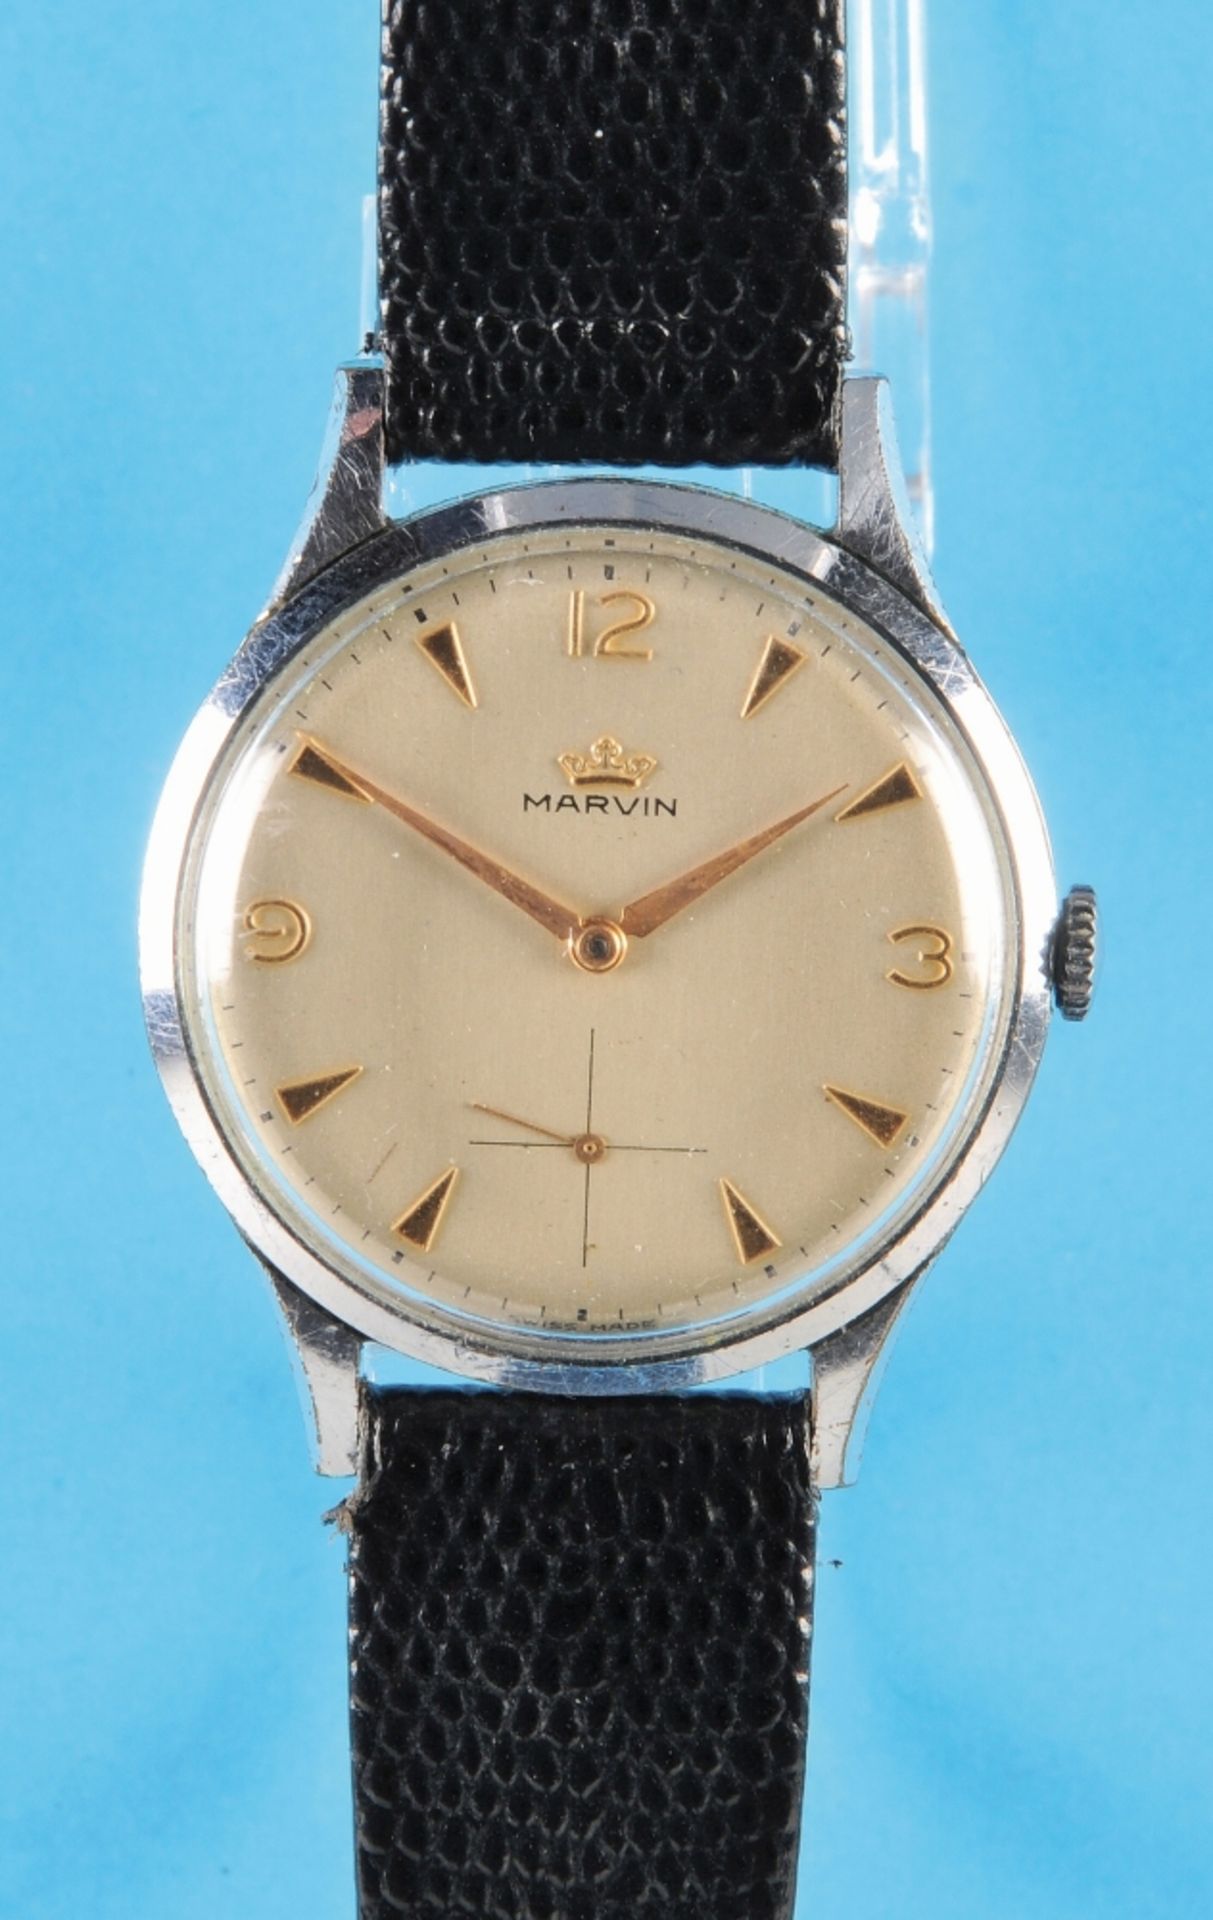 Marvin wristwatch, case with steel pressure caseback, cal. Marvin 700, silver-plated dial with gold